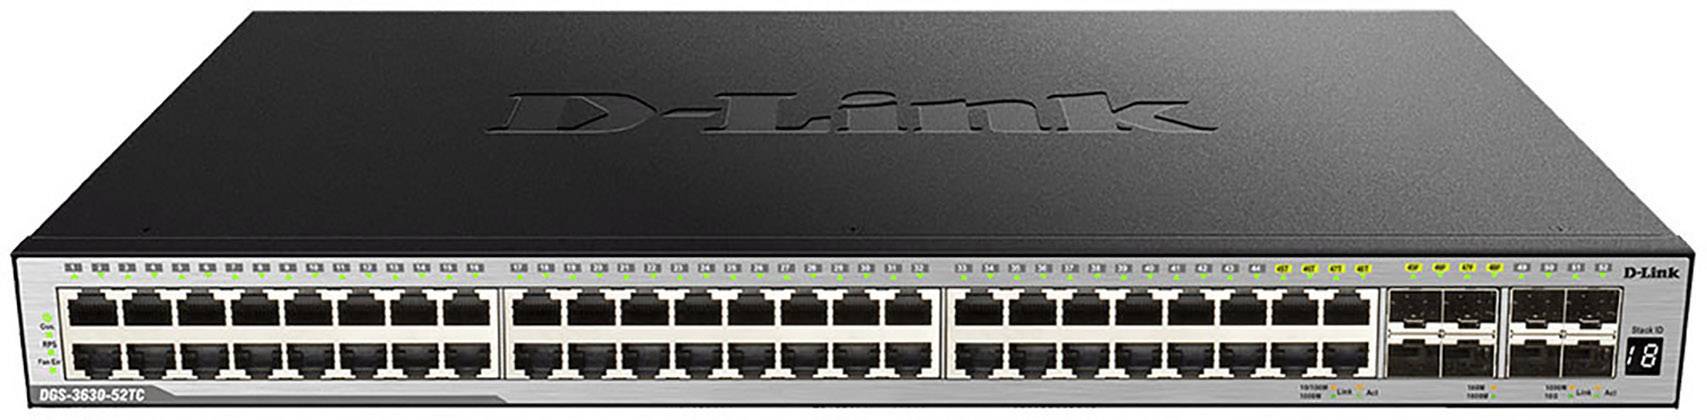 D-LINK 52-Port Layer 3 Gigabit PoE Stack Switch (SI)